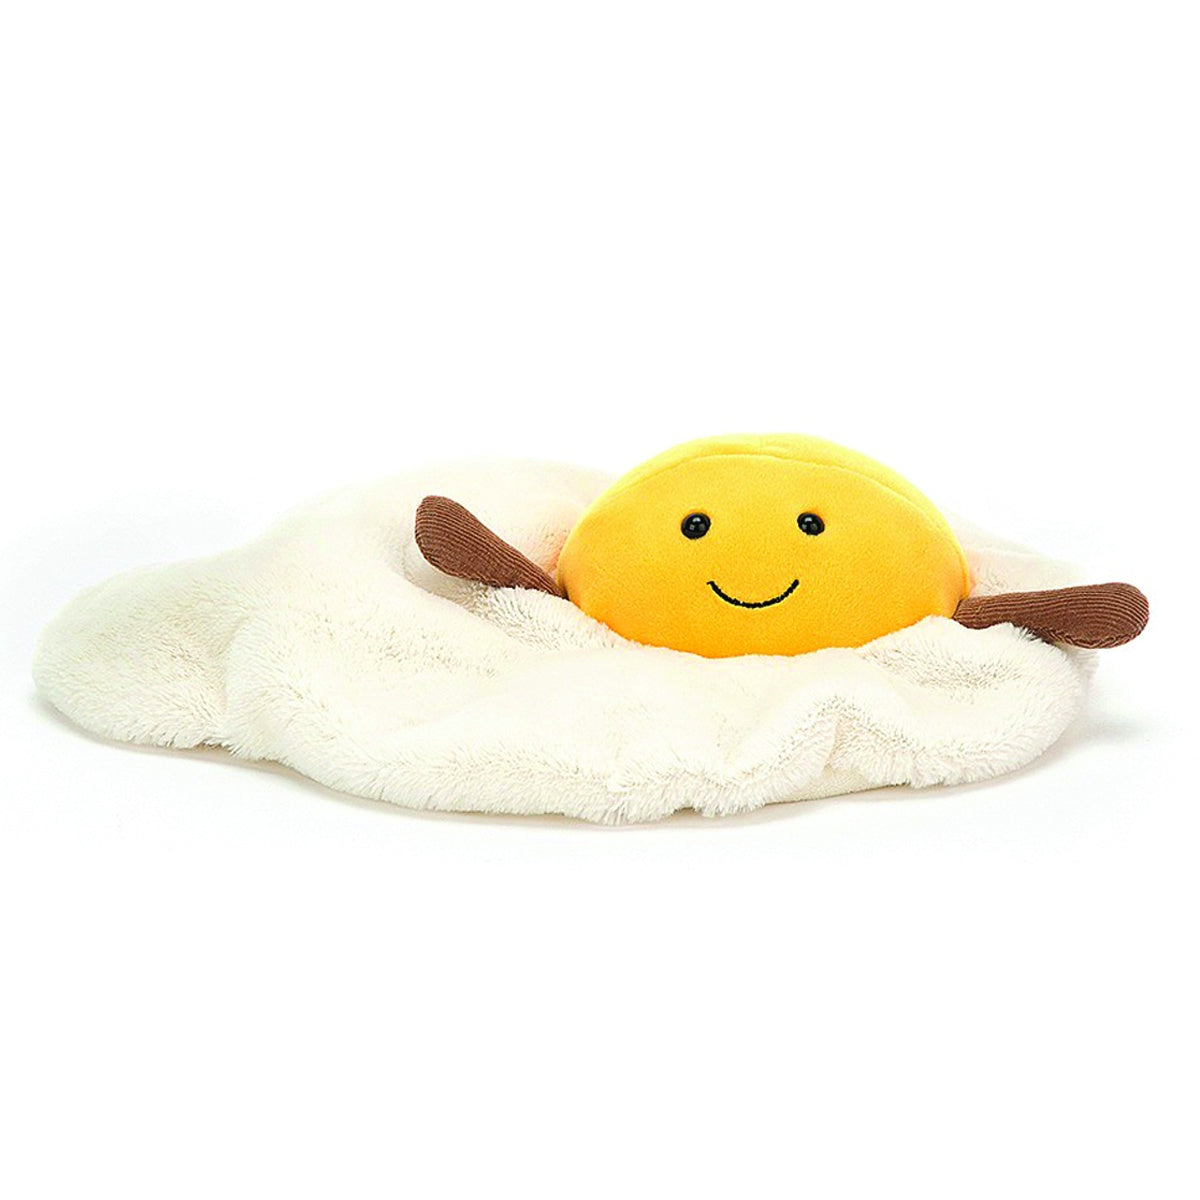 Deer Industries Jellycat Soft Toy Amuseable Fried Egg. Egg soft toy sunny side up. Great gift for all egg-lovers, fun and soft. Jellycat Singapore.